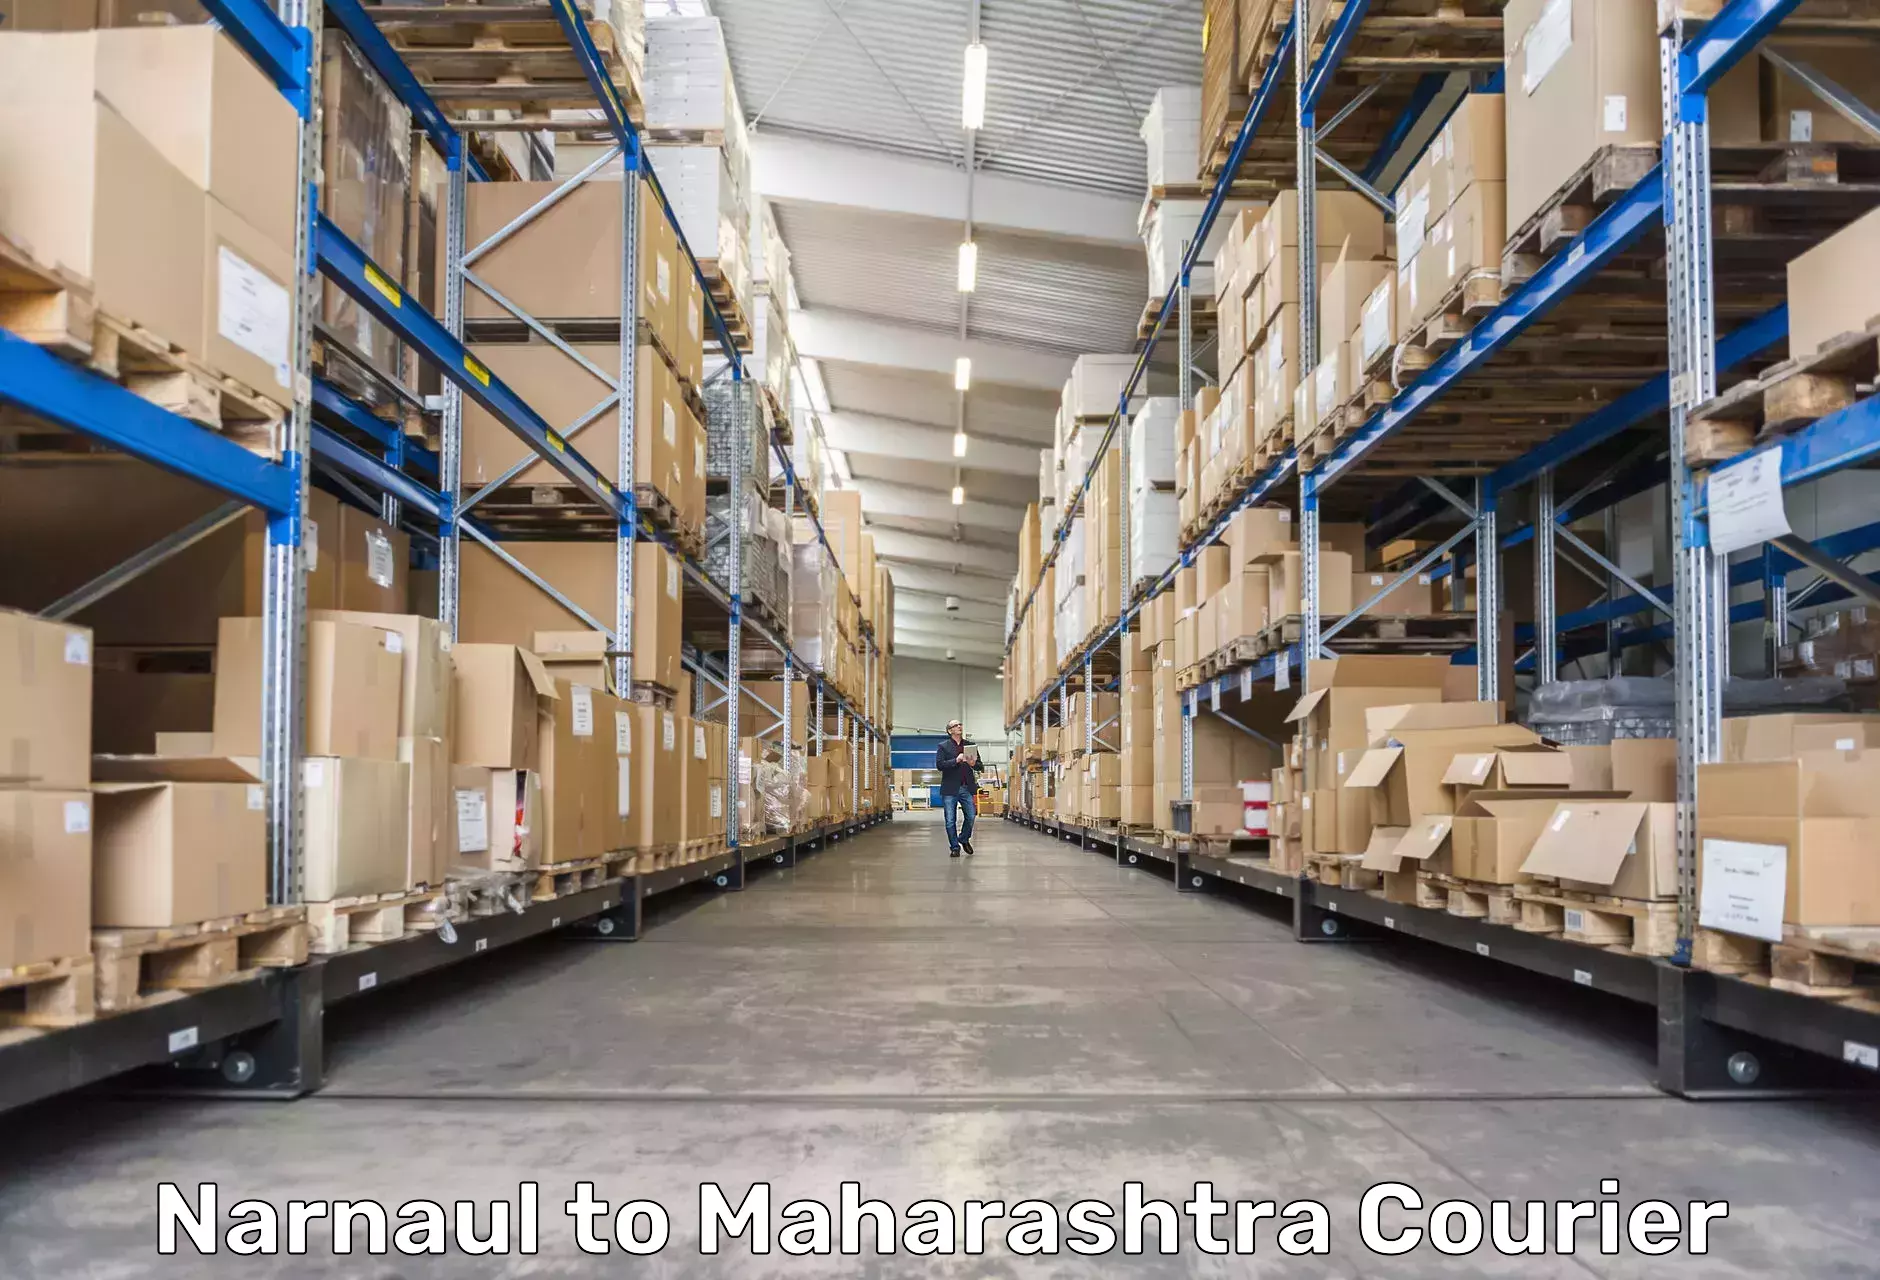 Sustainable courier practices Narnaul to Dhule